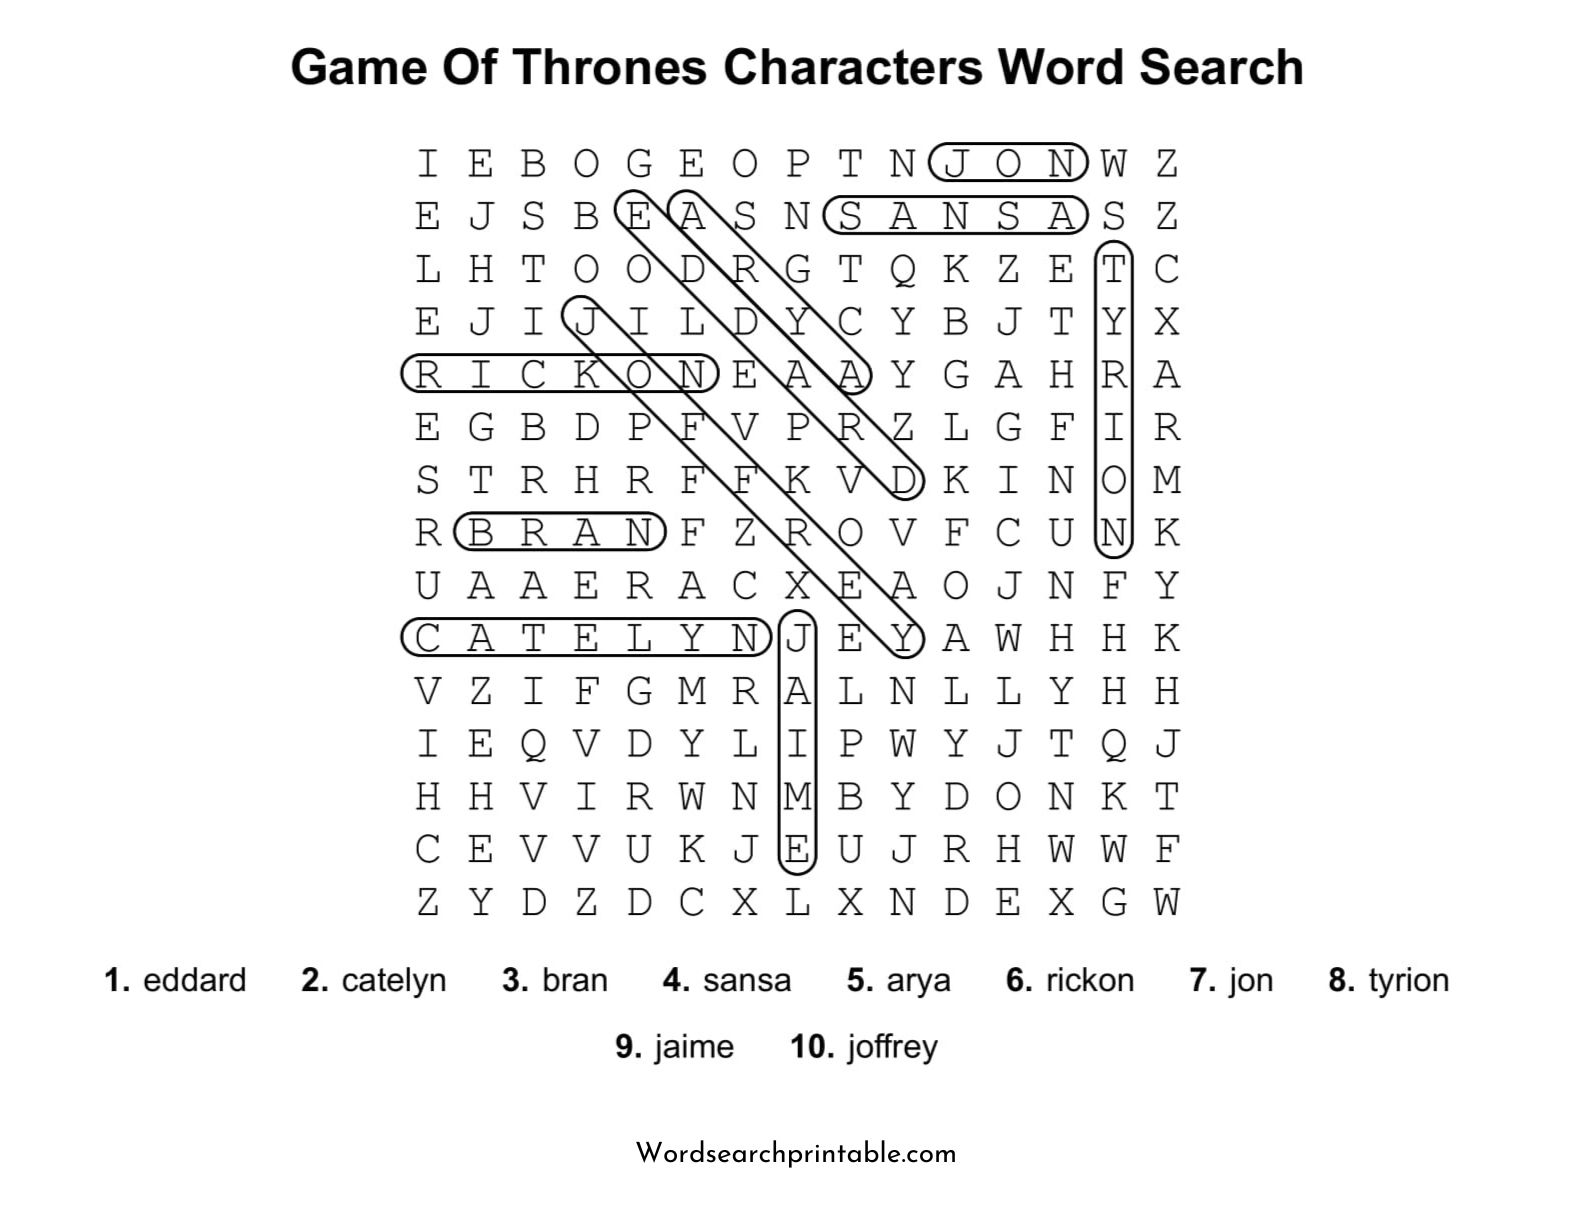 game of thrones characters word search puzzle solution